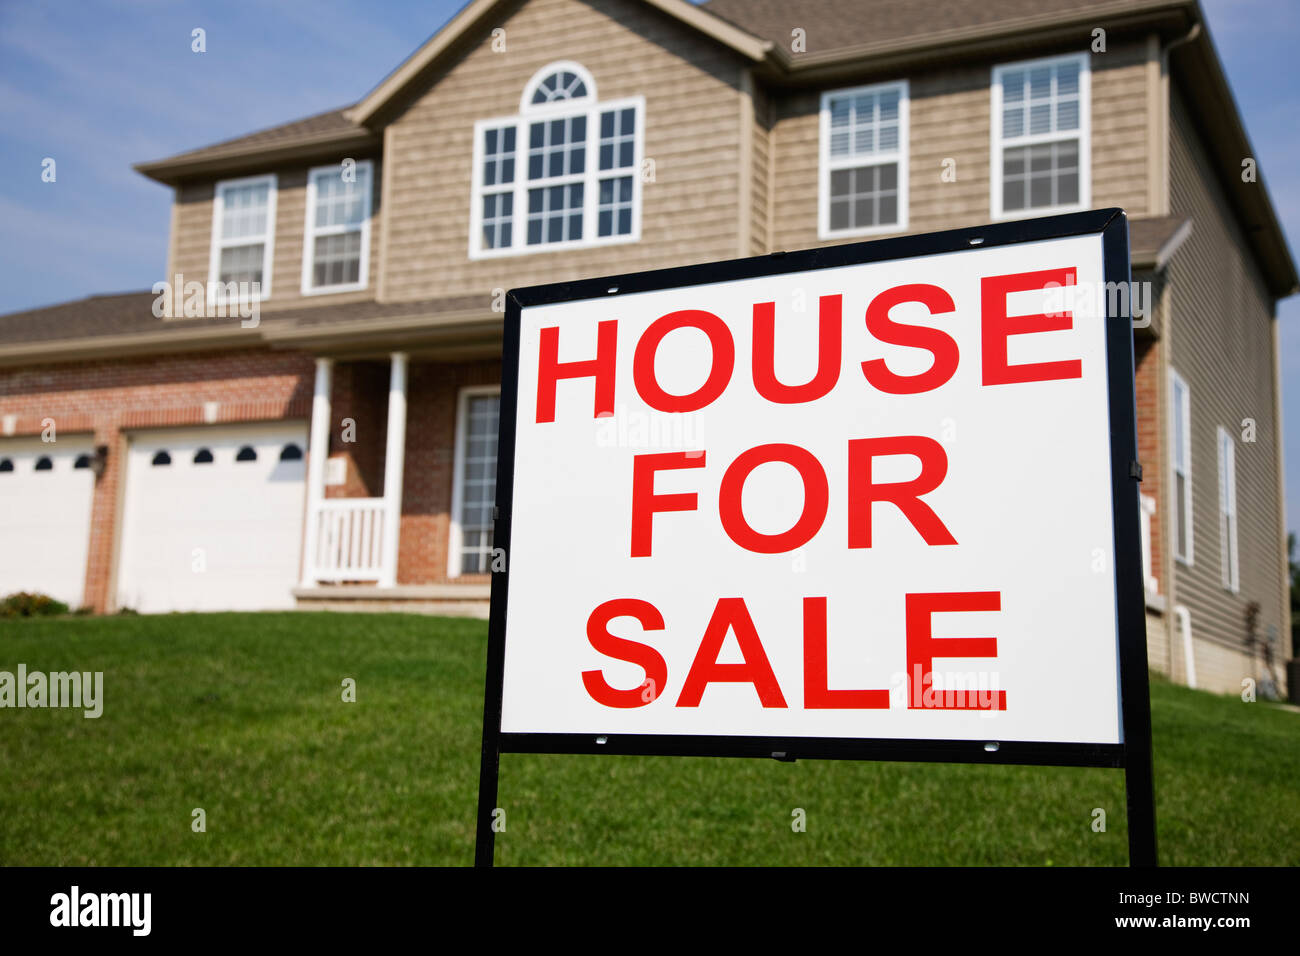 House for sale sign Stock Photo by ©montego 64459339